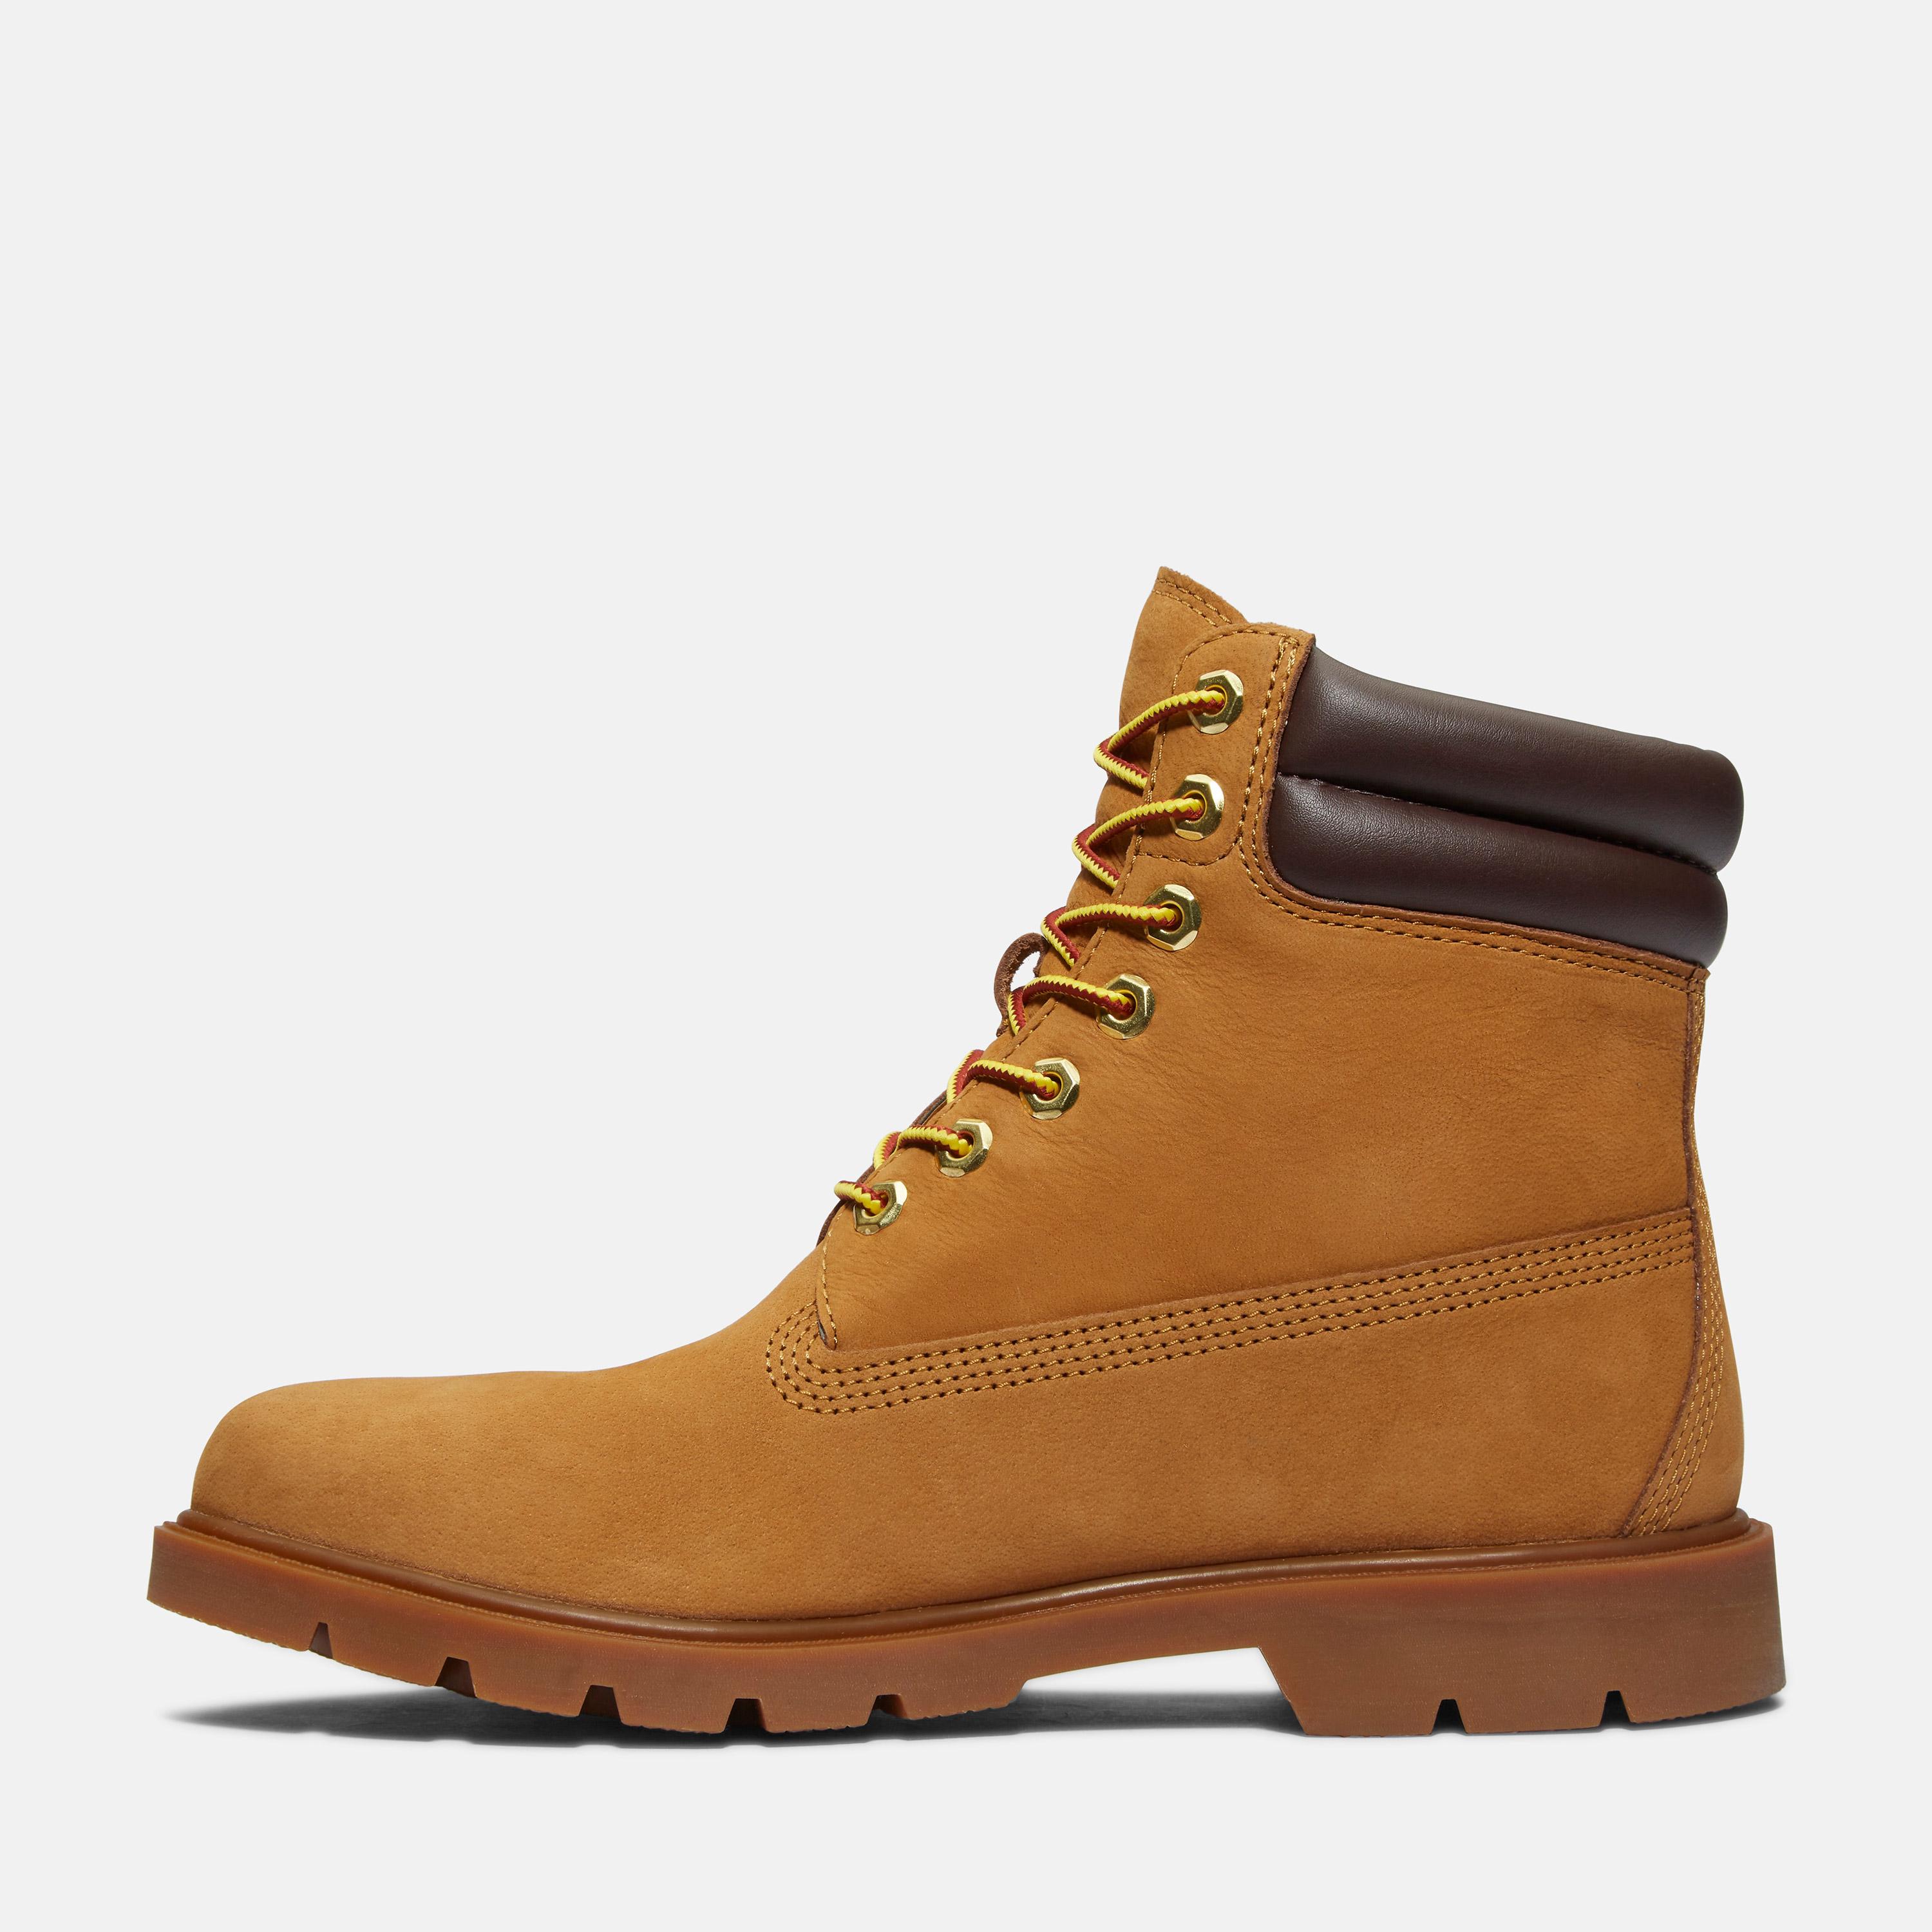 Men's 6-inch Water Resistant Boot - Timberland - Malaysia